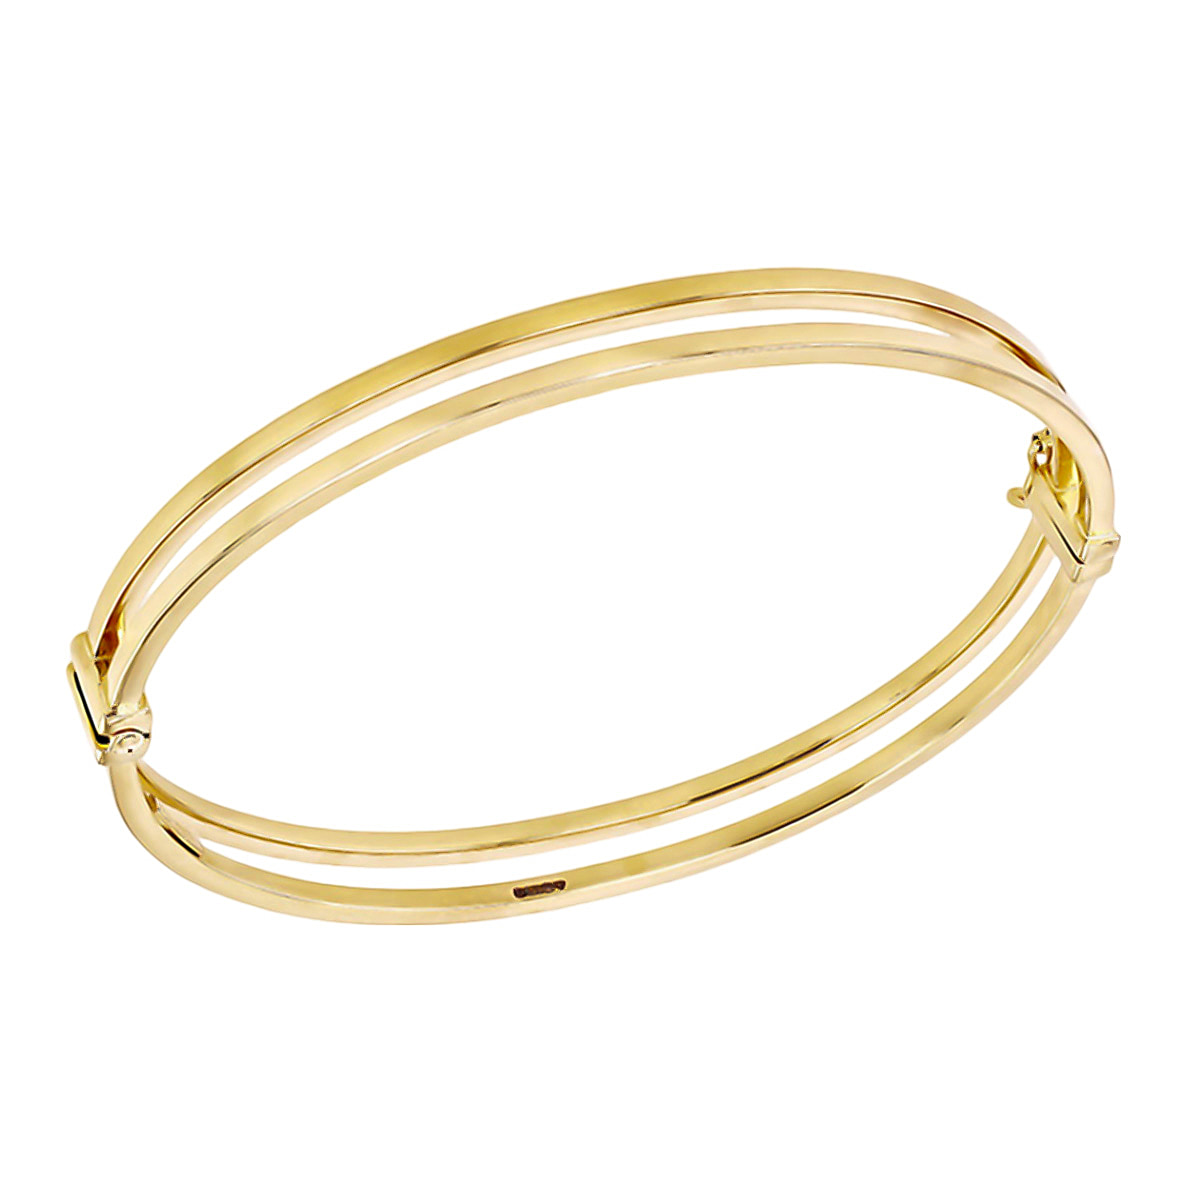 Designer Inspired-9K Yellow Gold Double Square Bangle (7.5inch), Gold Wt. 4.80 Gm